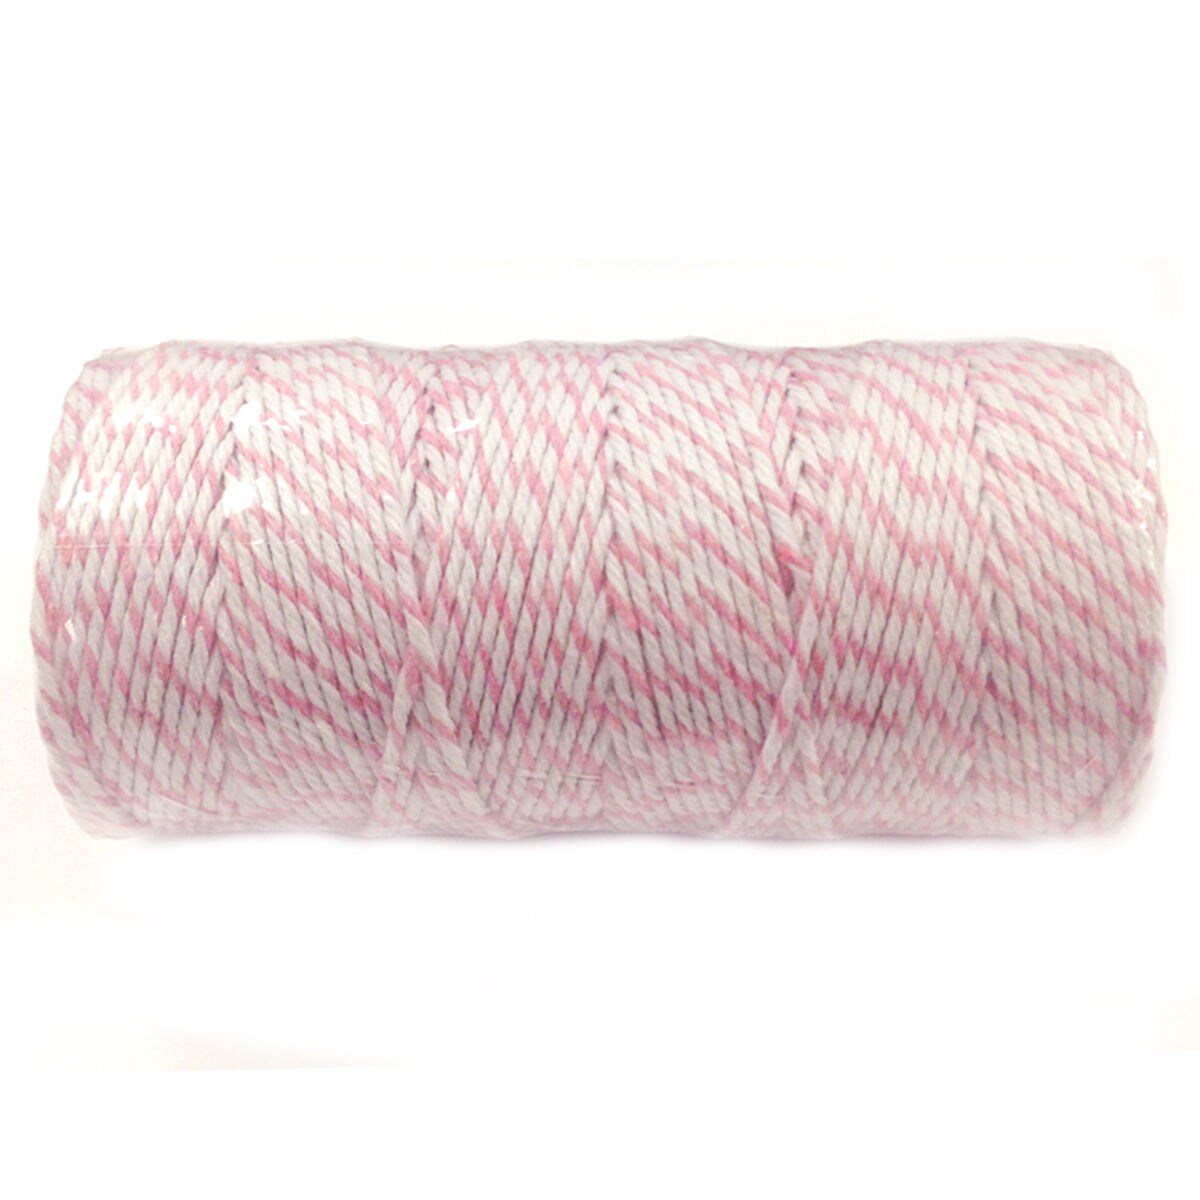 Hot Pink Bakers Twine, Packaging Twine